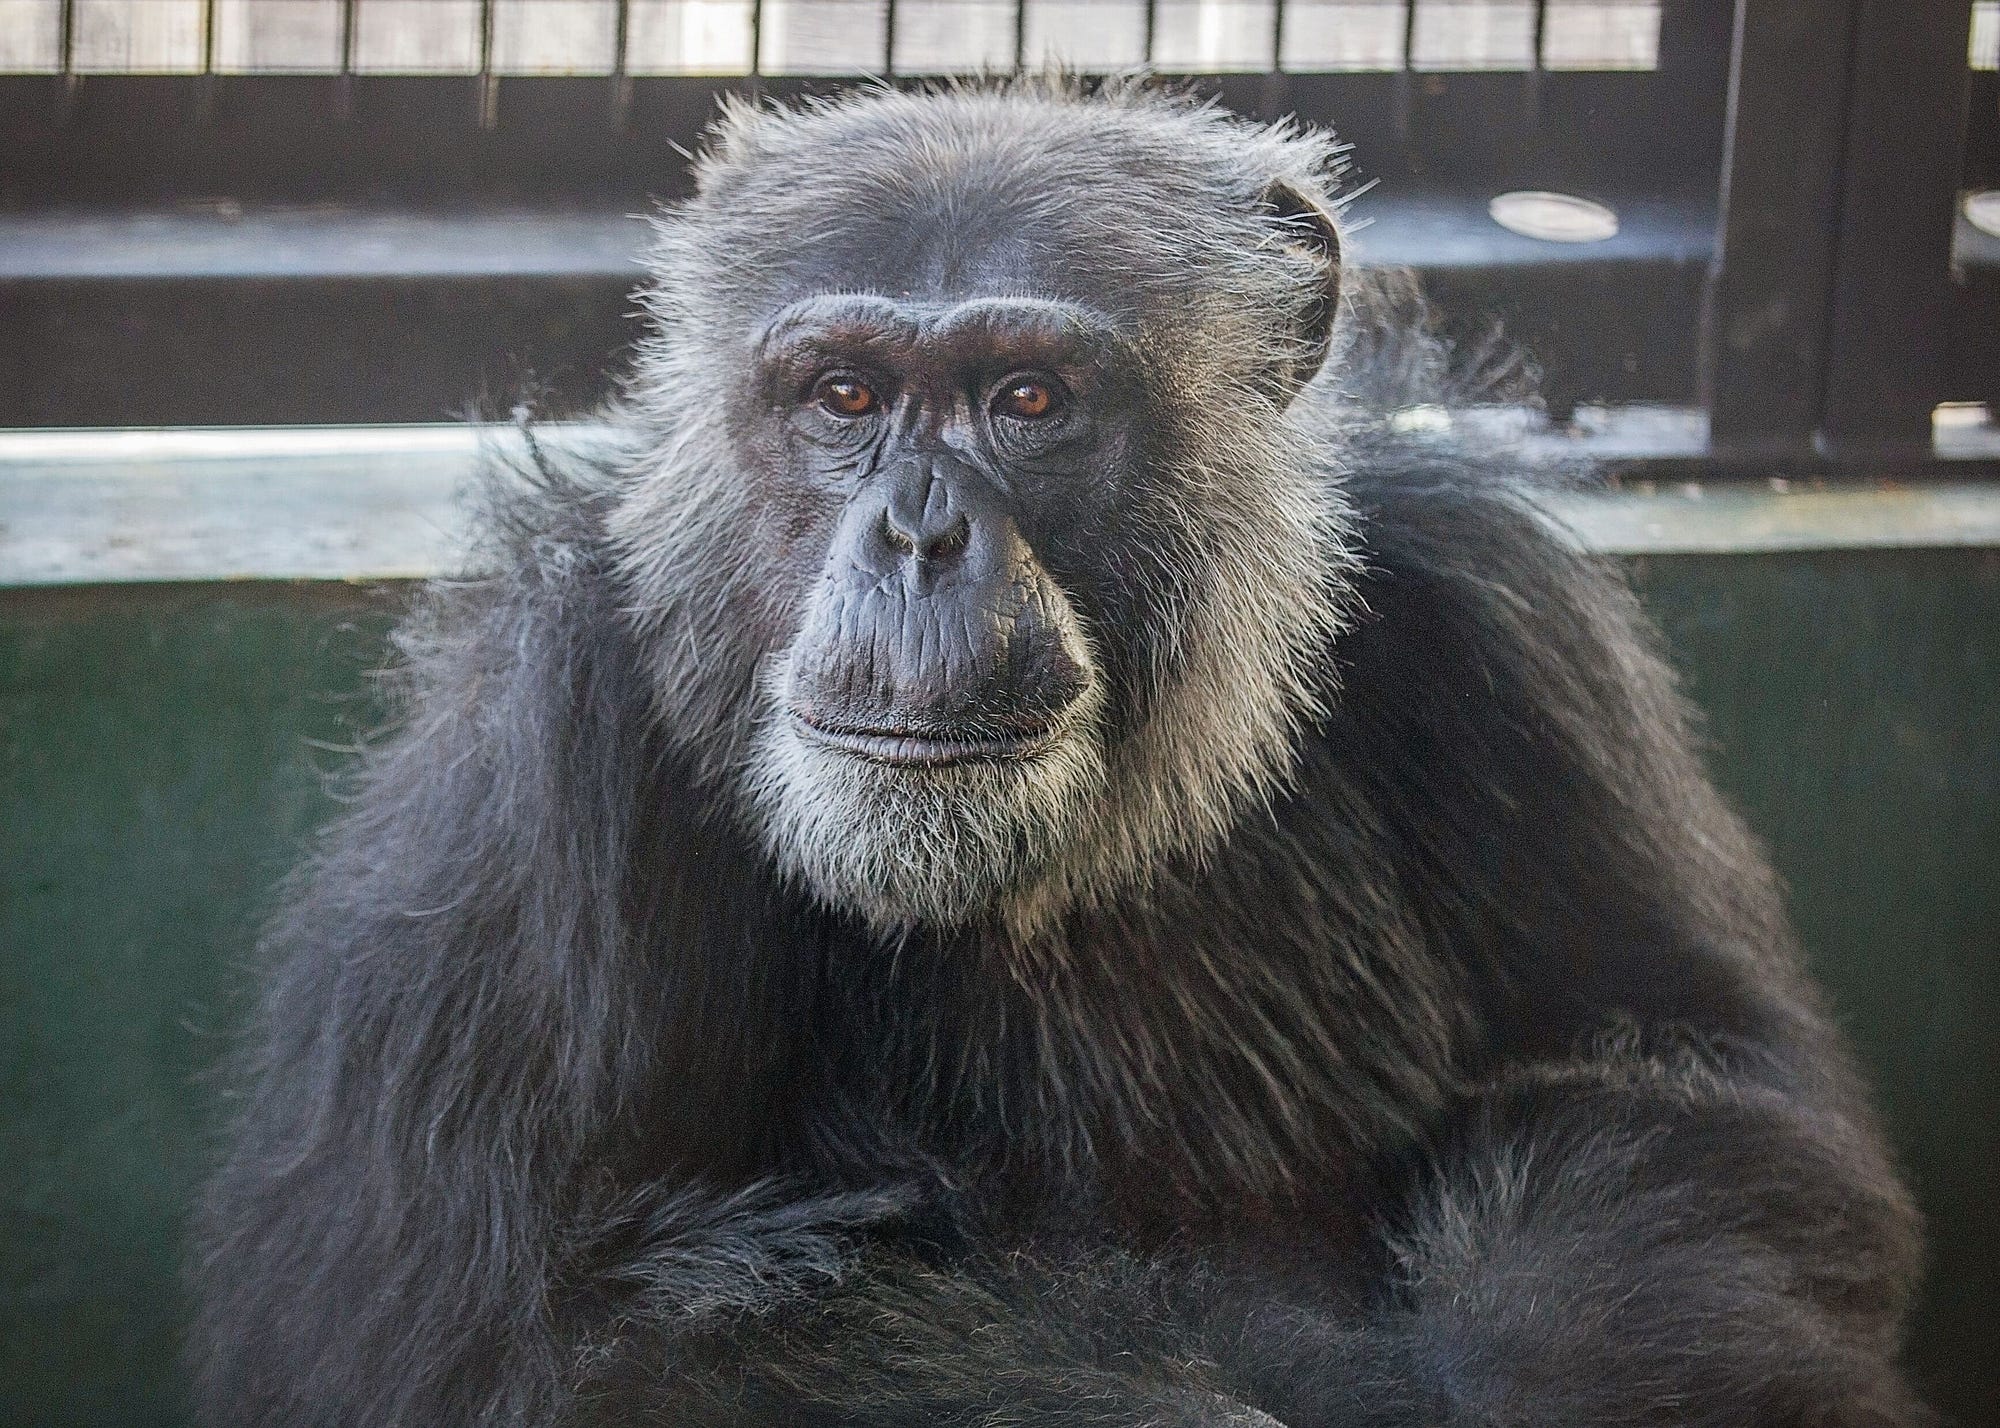 The Stoic Research Chimp Who Finally Made It Out | by Jessica Scott-Reid |  Tenderly